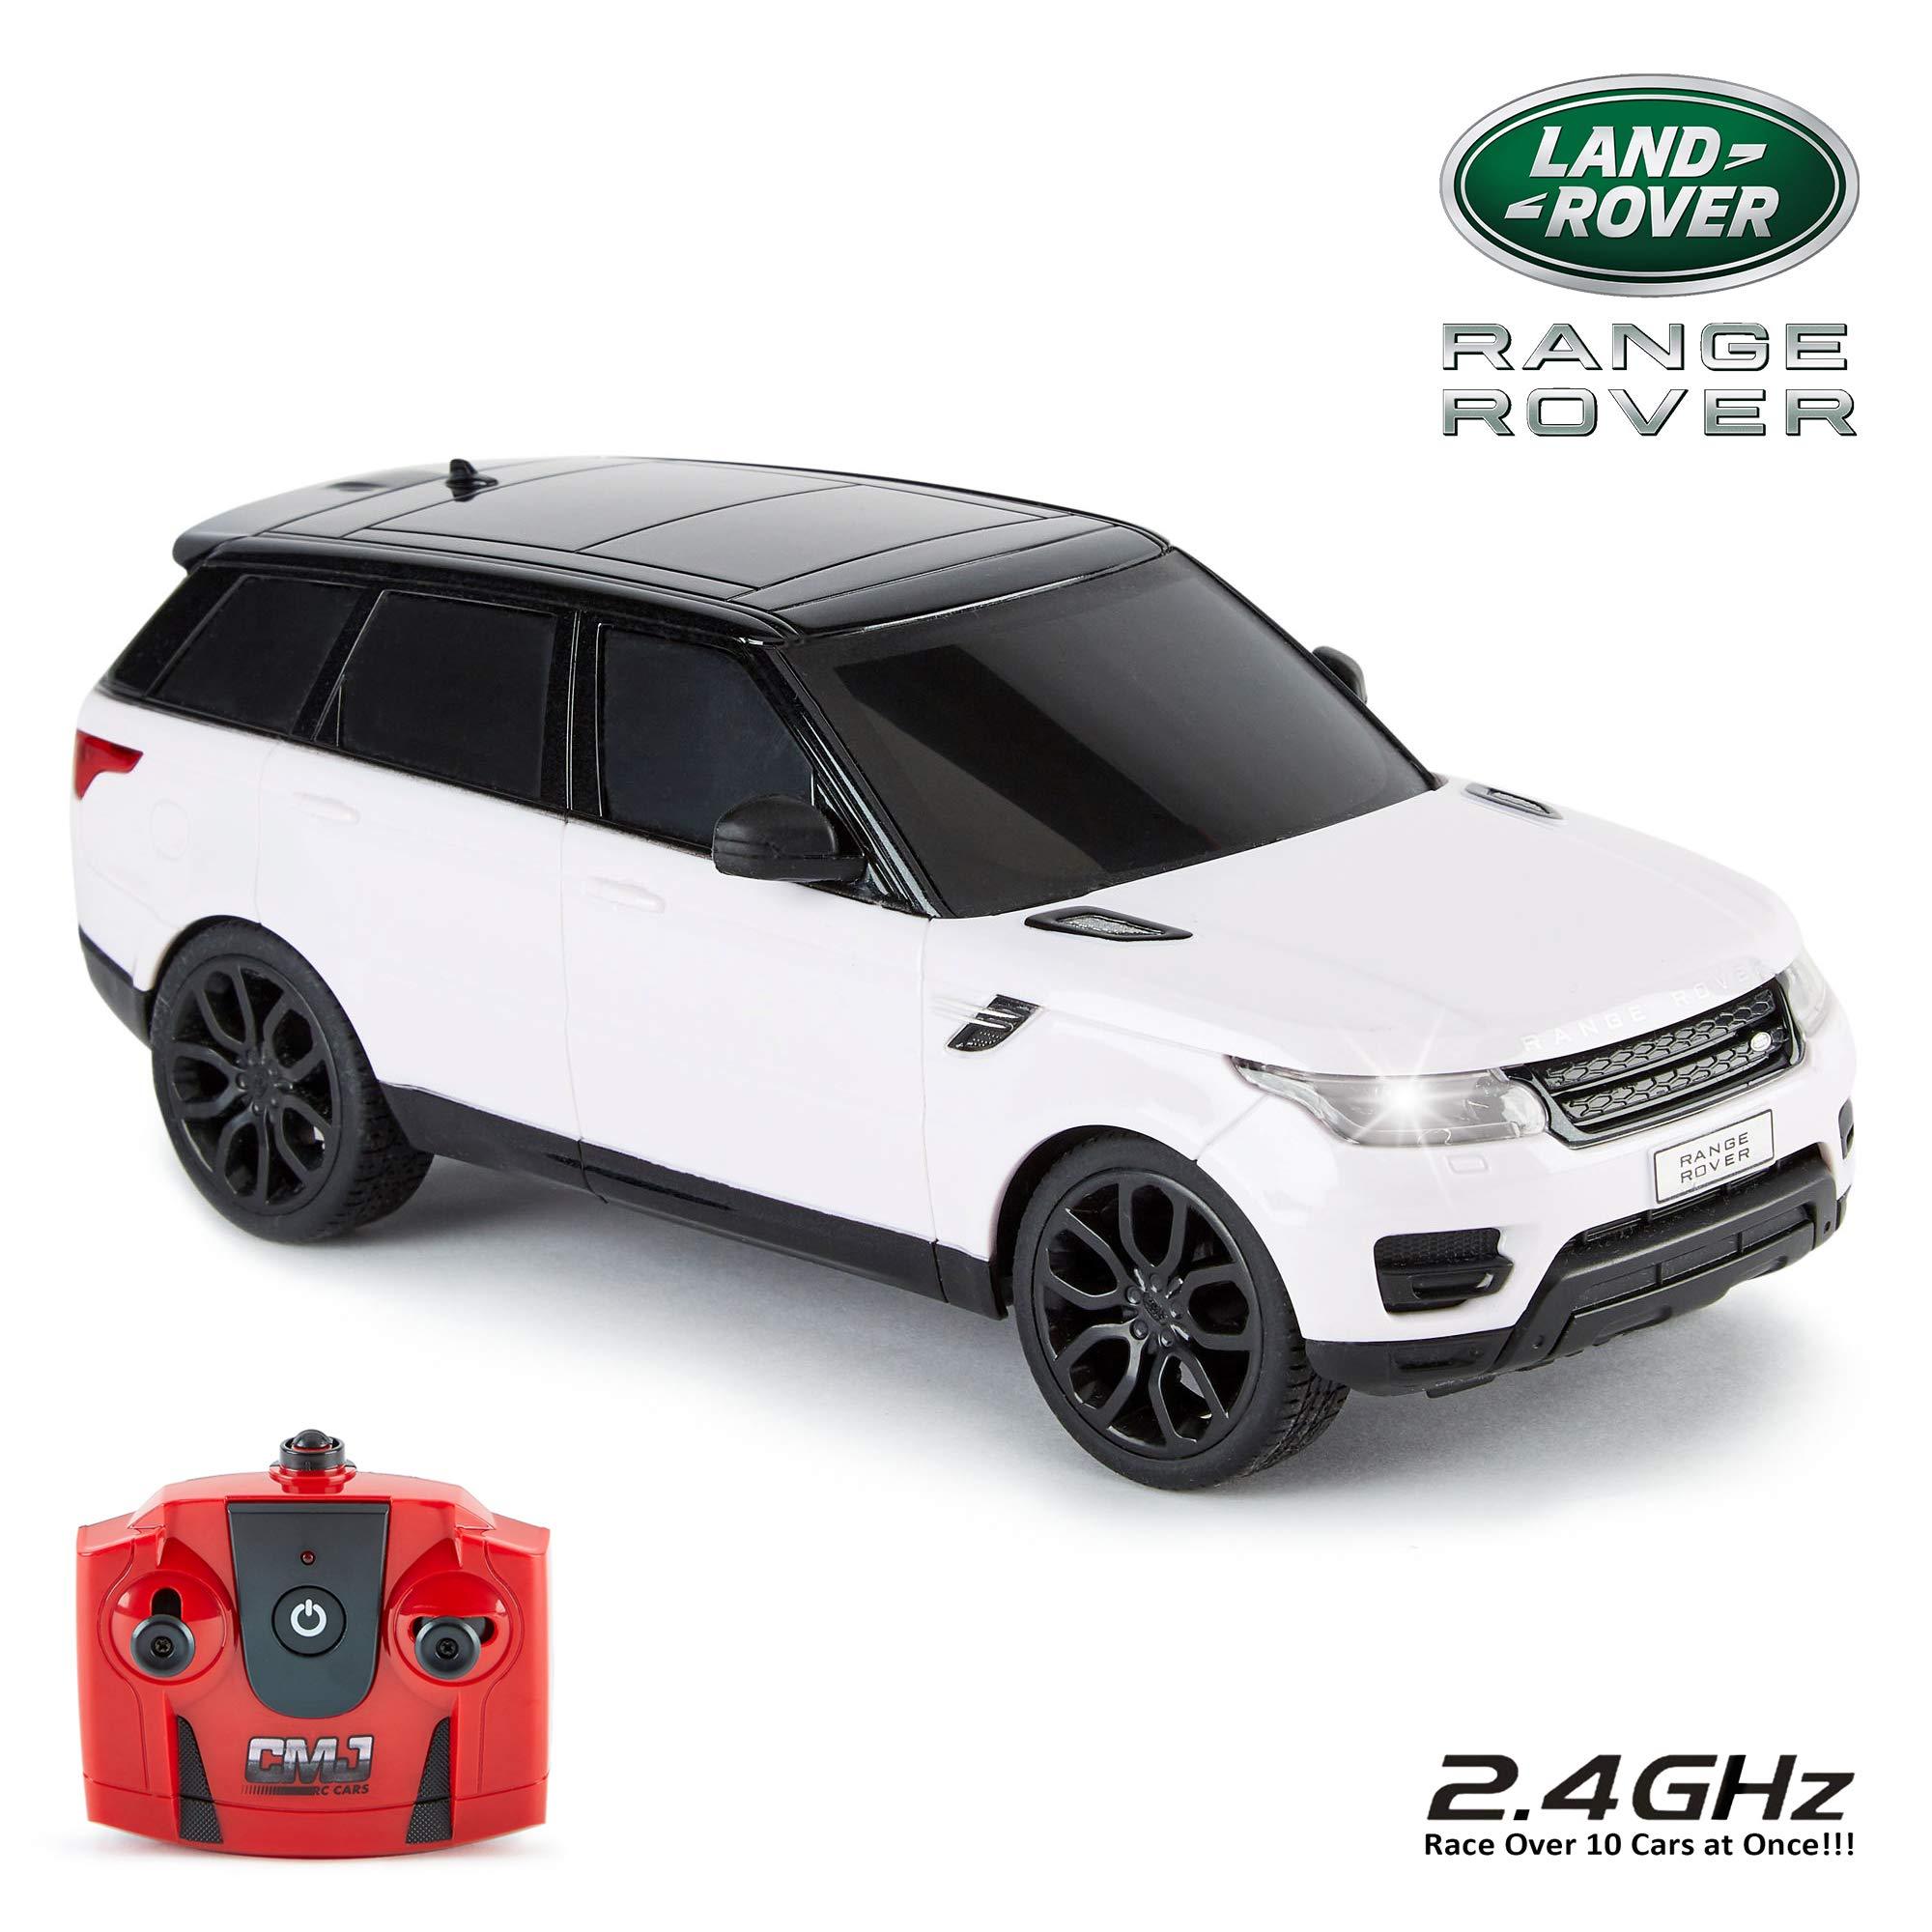 Range Rover Remote Control Car: Experience the Adventure of a Range Rover Remote Control Car